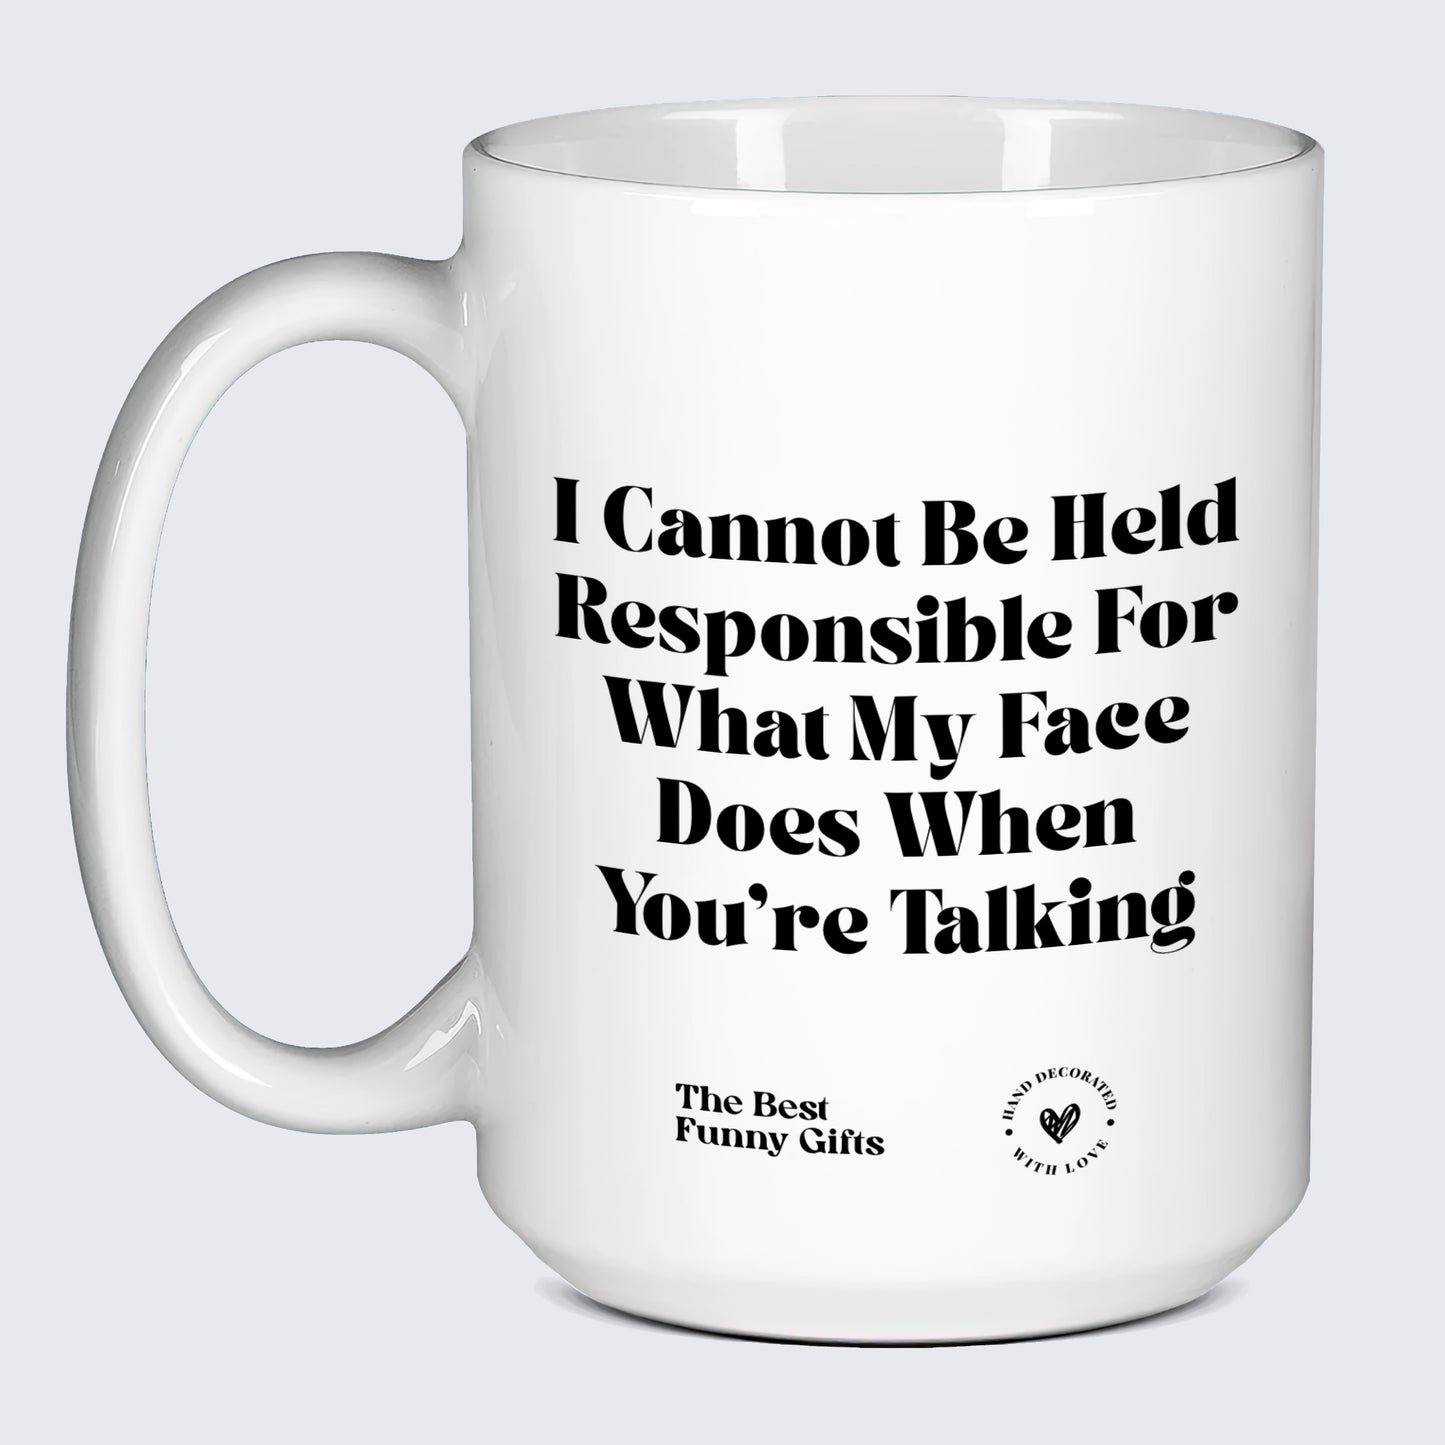 Cute Mugs I Cannot Be Held Responsible for What My Face Does When You're Talking - The Best Funny Gifts